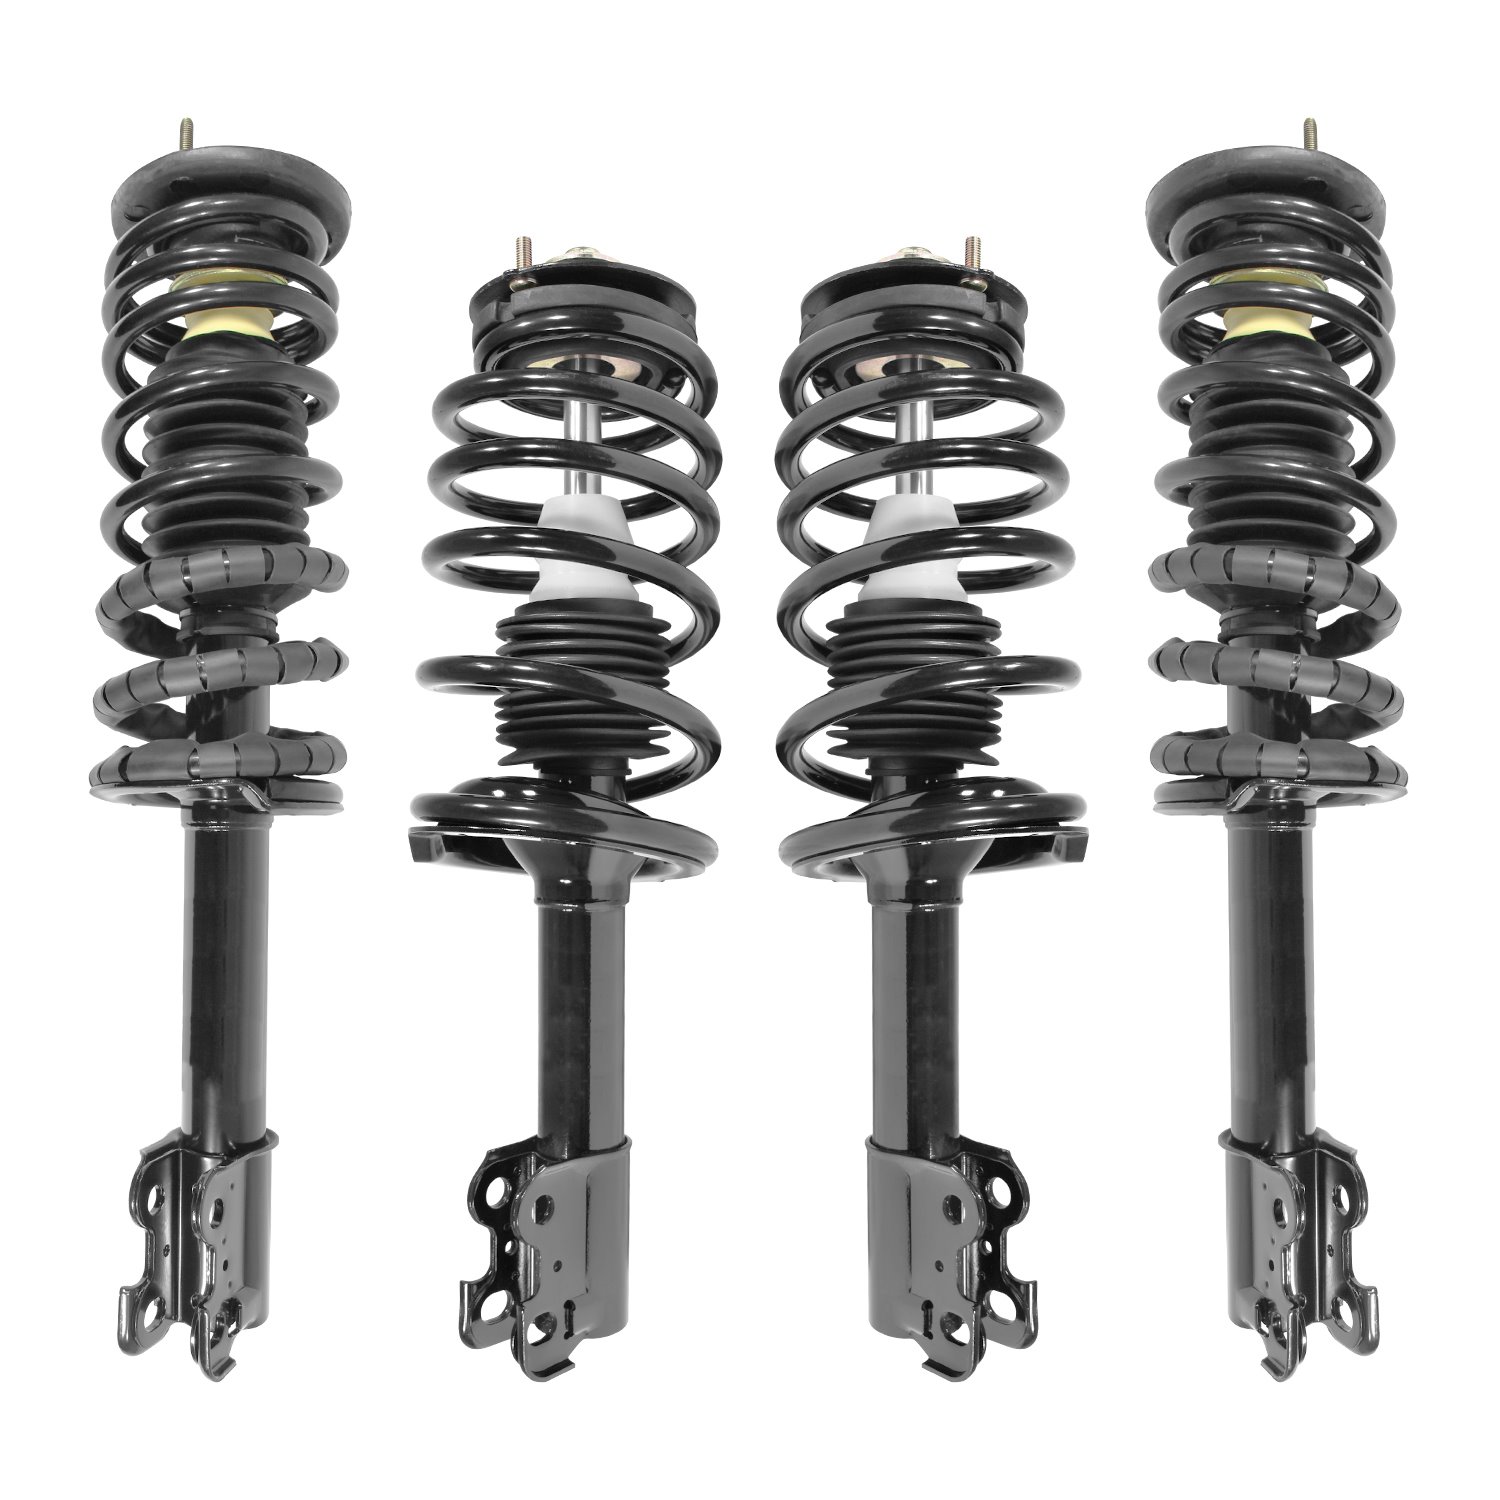 4-11220-15230-001 Front & Rear Suspension Strut & Coil Spring Assembly Kit Fits Select Saturn